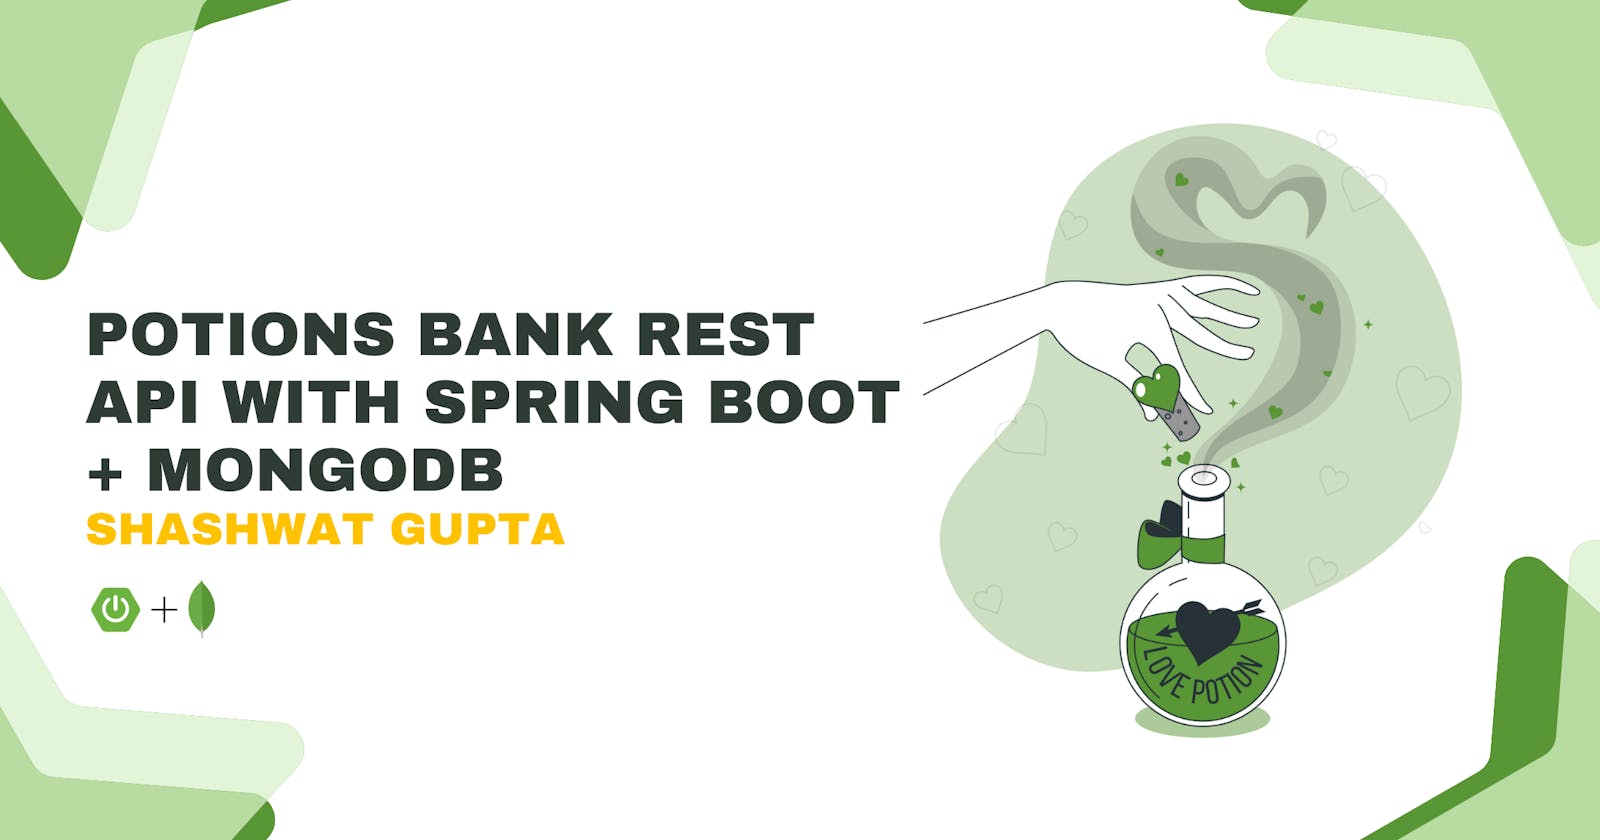 Writing a Potions Bank REST API with Spring Boot + MongoDB